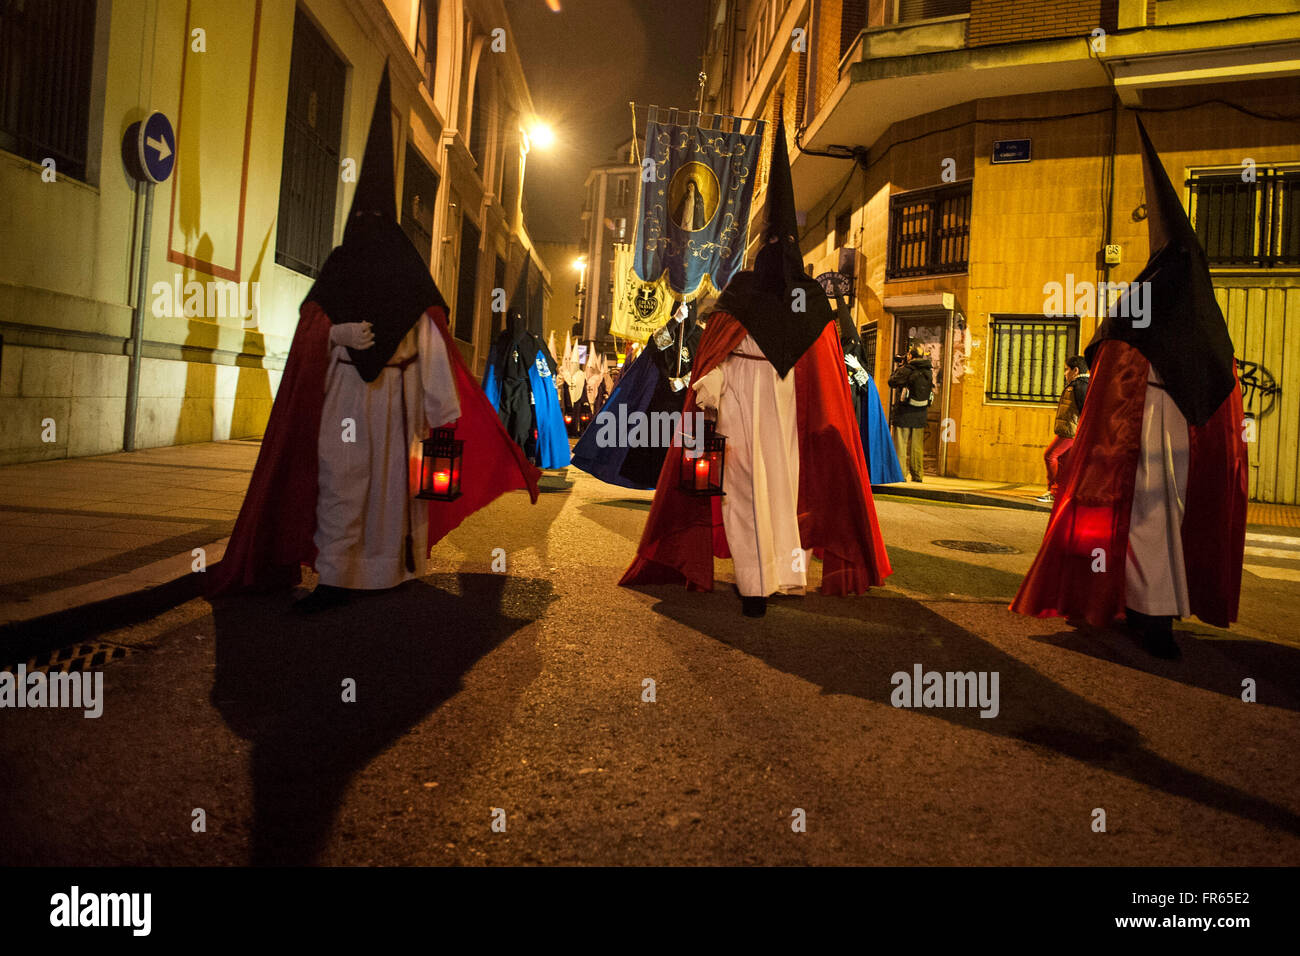 Santander, Spain. 21st March, 2016. Nazarenes through the streets of Santander during nighttime procession of prayer celebrated on Easter Monday.  Credit:  JOAQUIN GOMEZ SASTRE/Alamy Live News Stock Photo